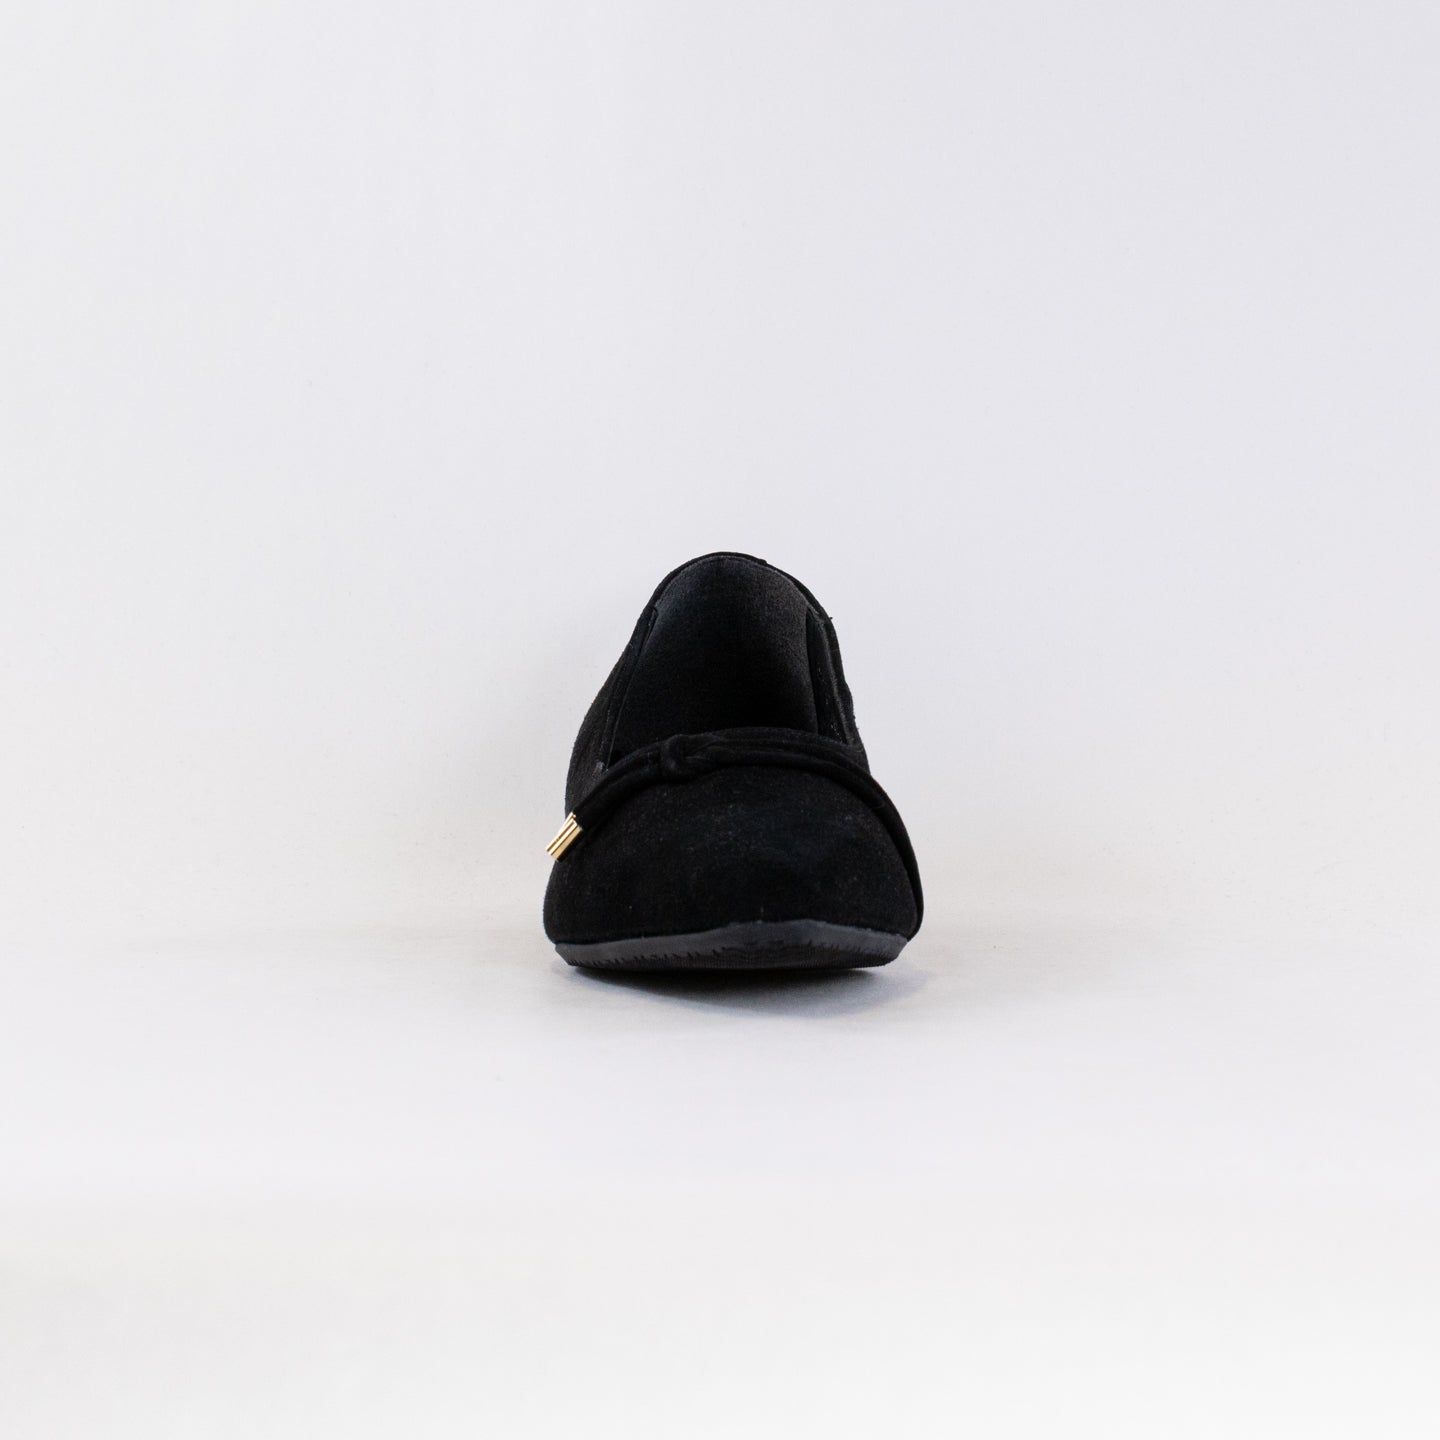 Eric Michael Kim Loafer (Women's) - Black Suede